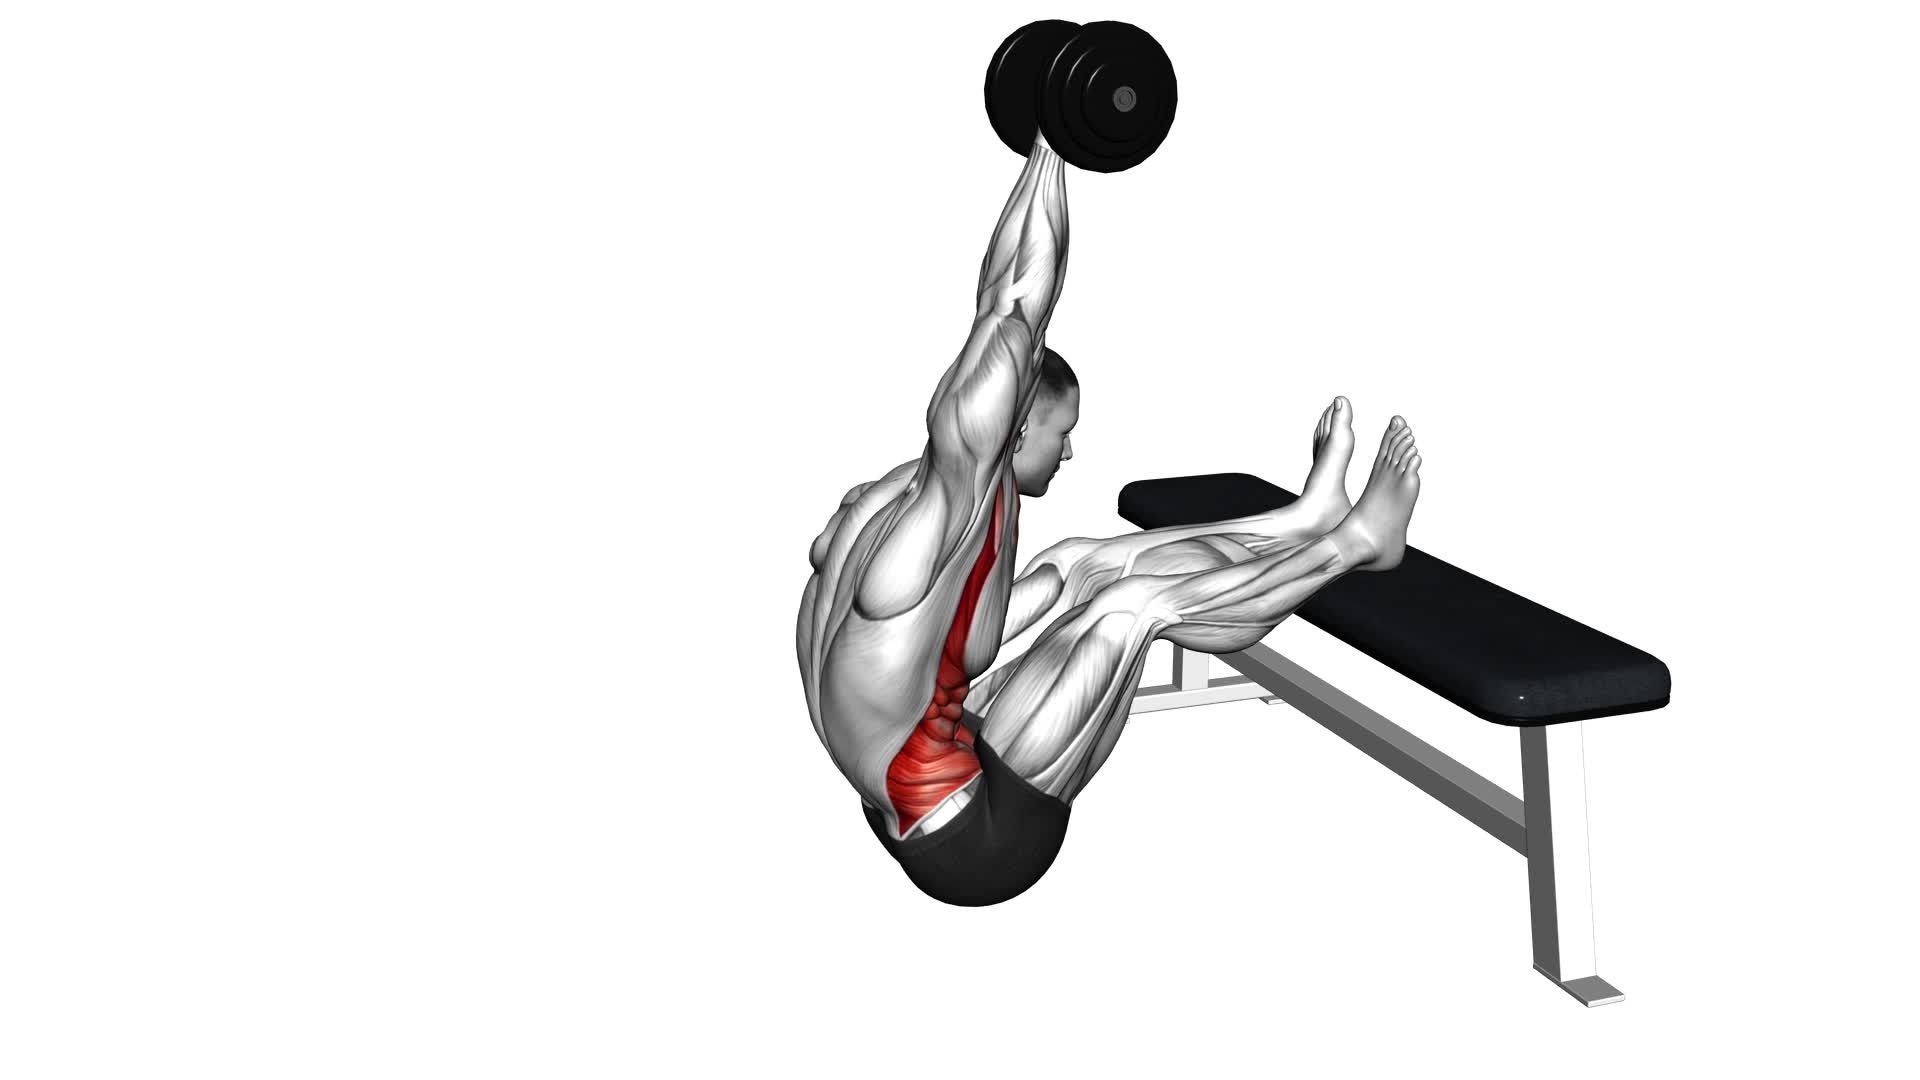 Dumbbell Overhead Sit-Up With Legs on Bench (Male) - Video Exercise Guide & Tips